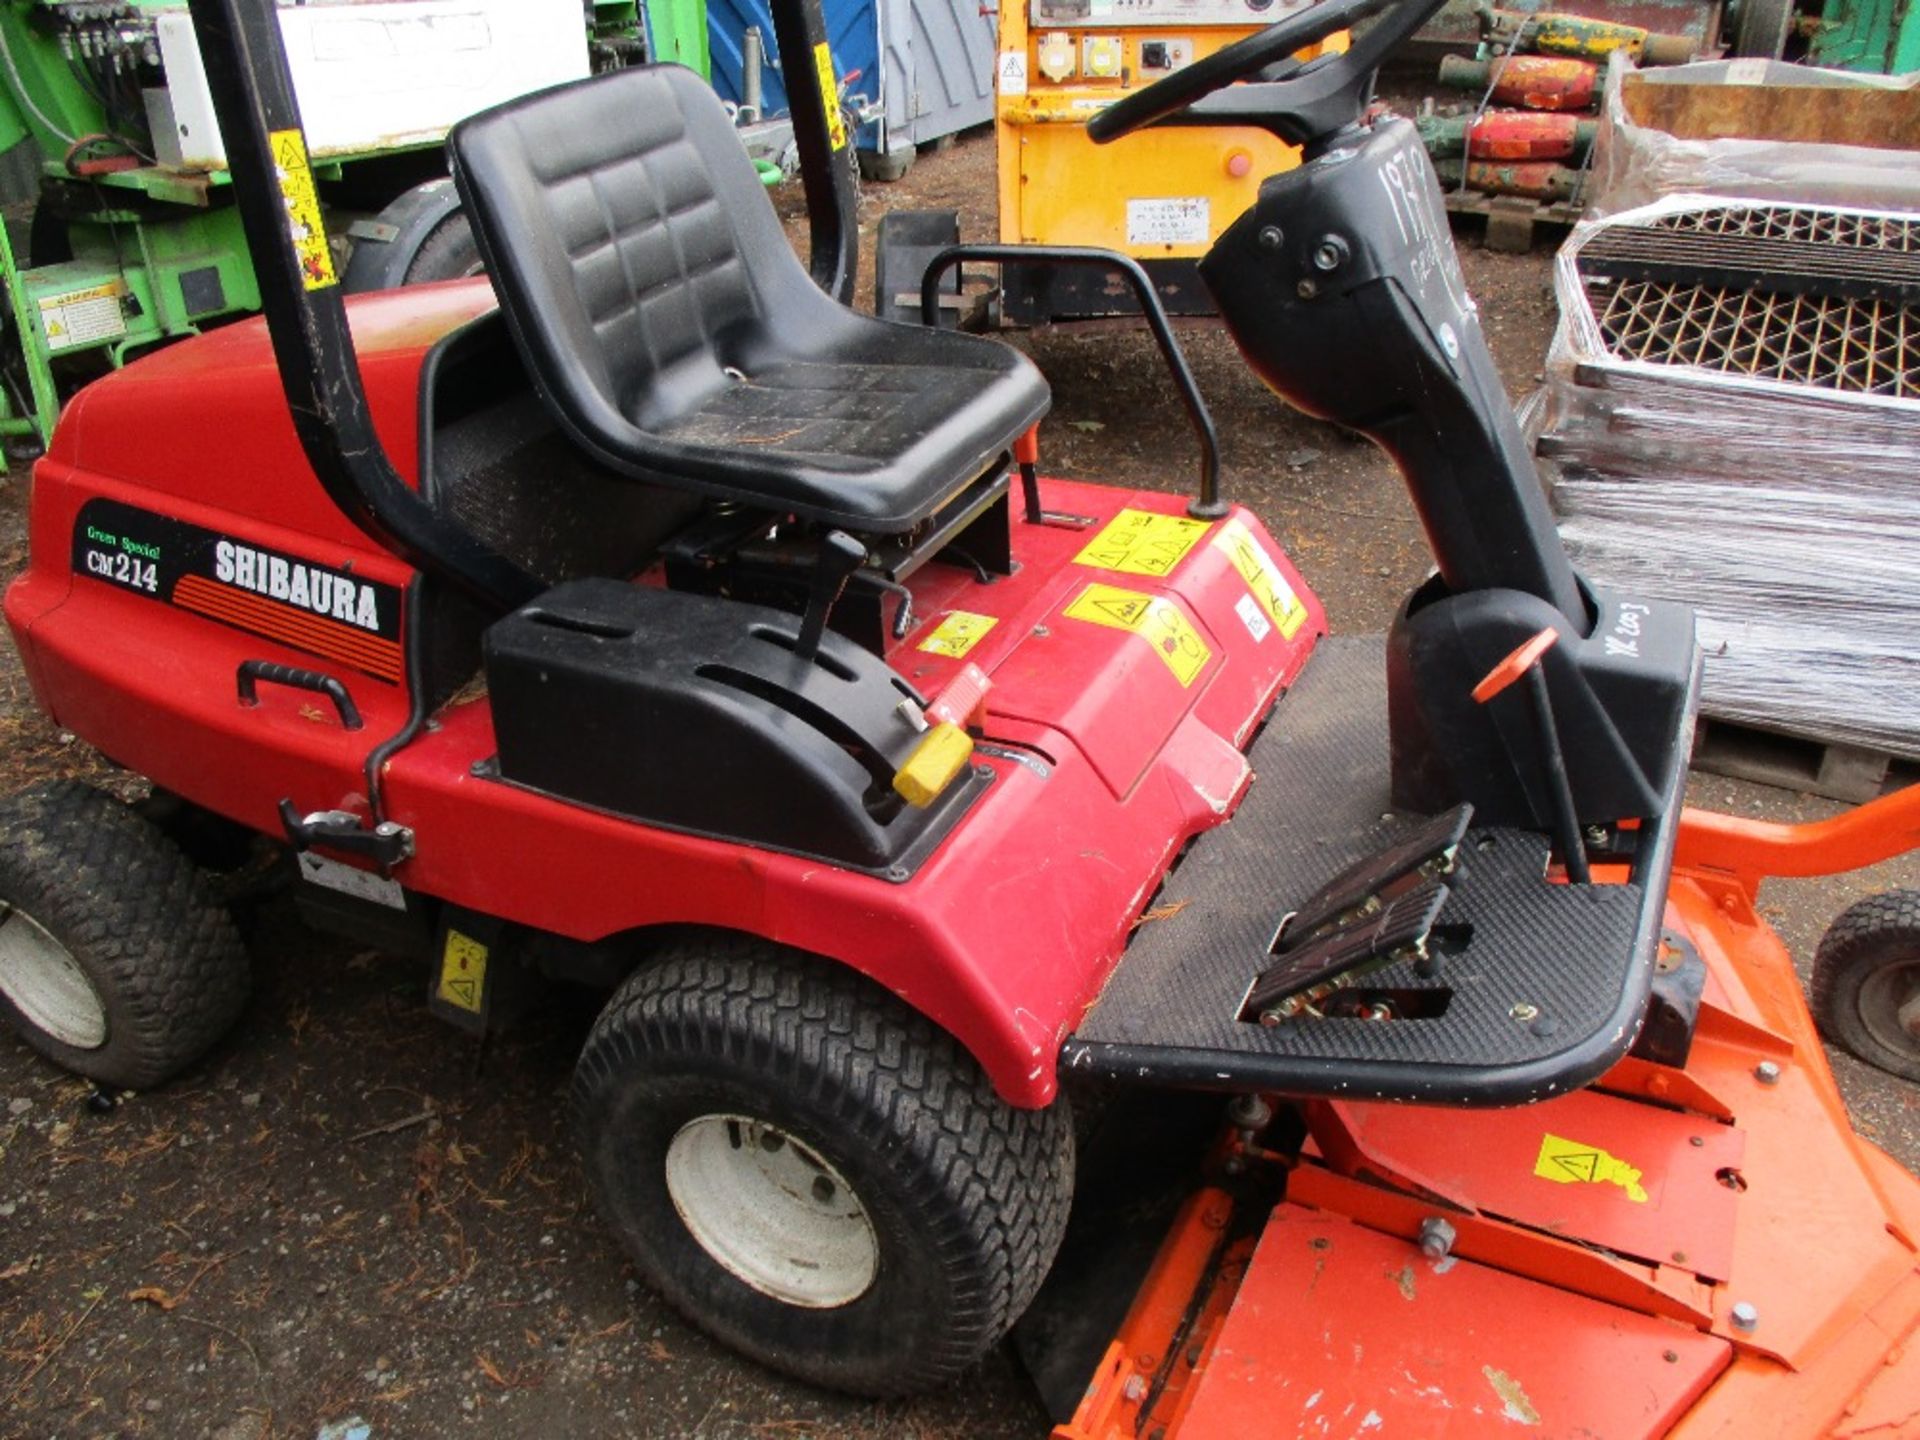 Shibaura CM214 4wd diesel outfront mower